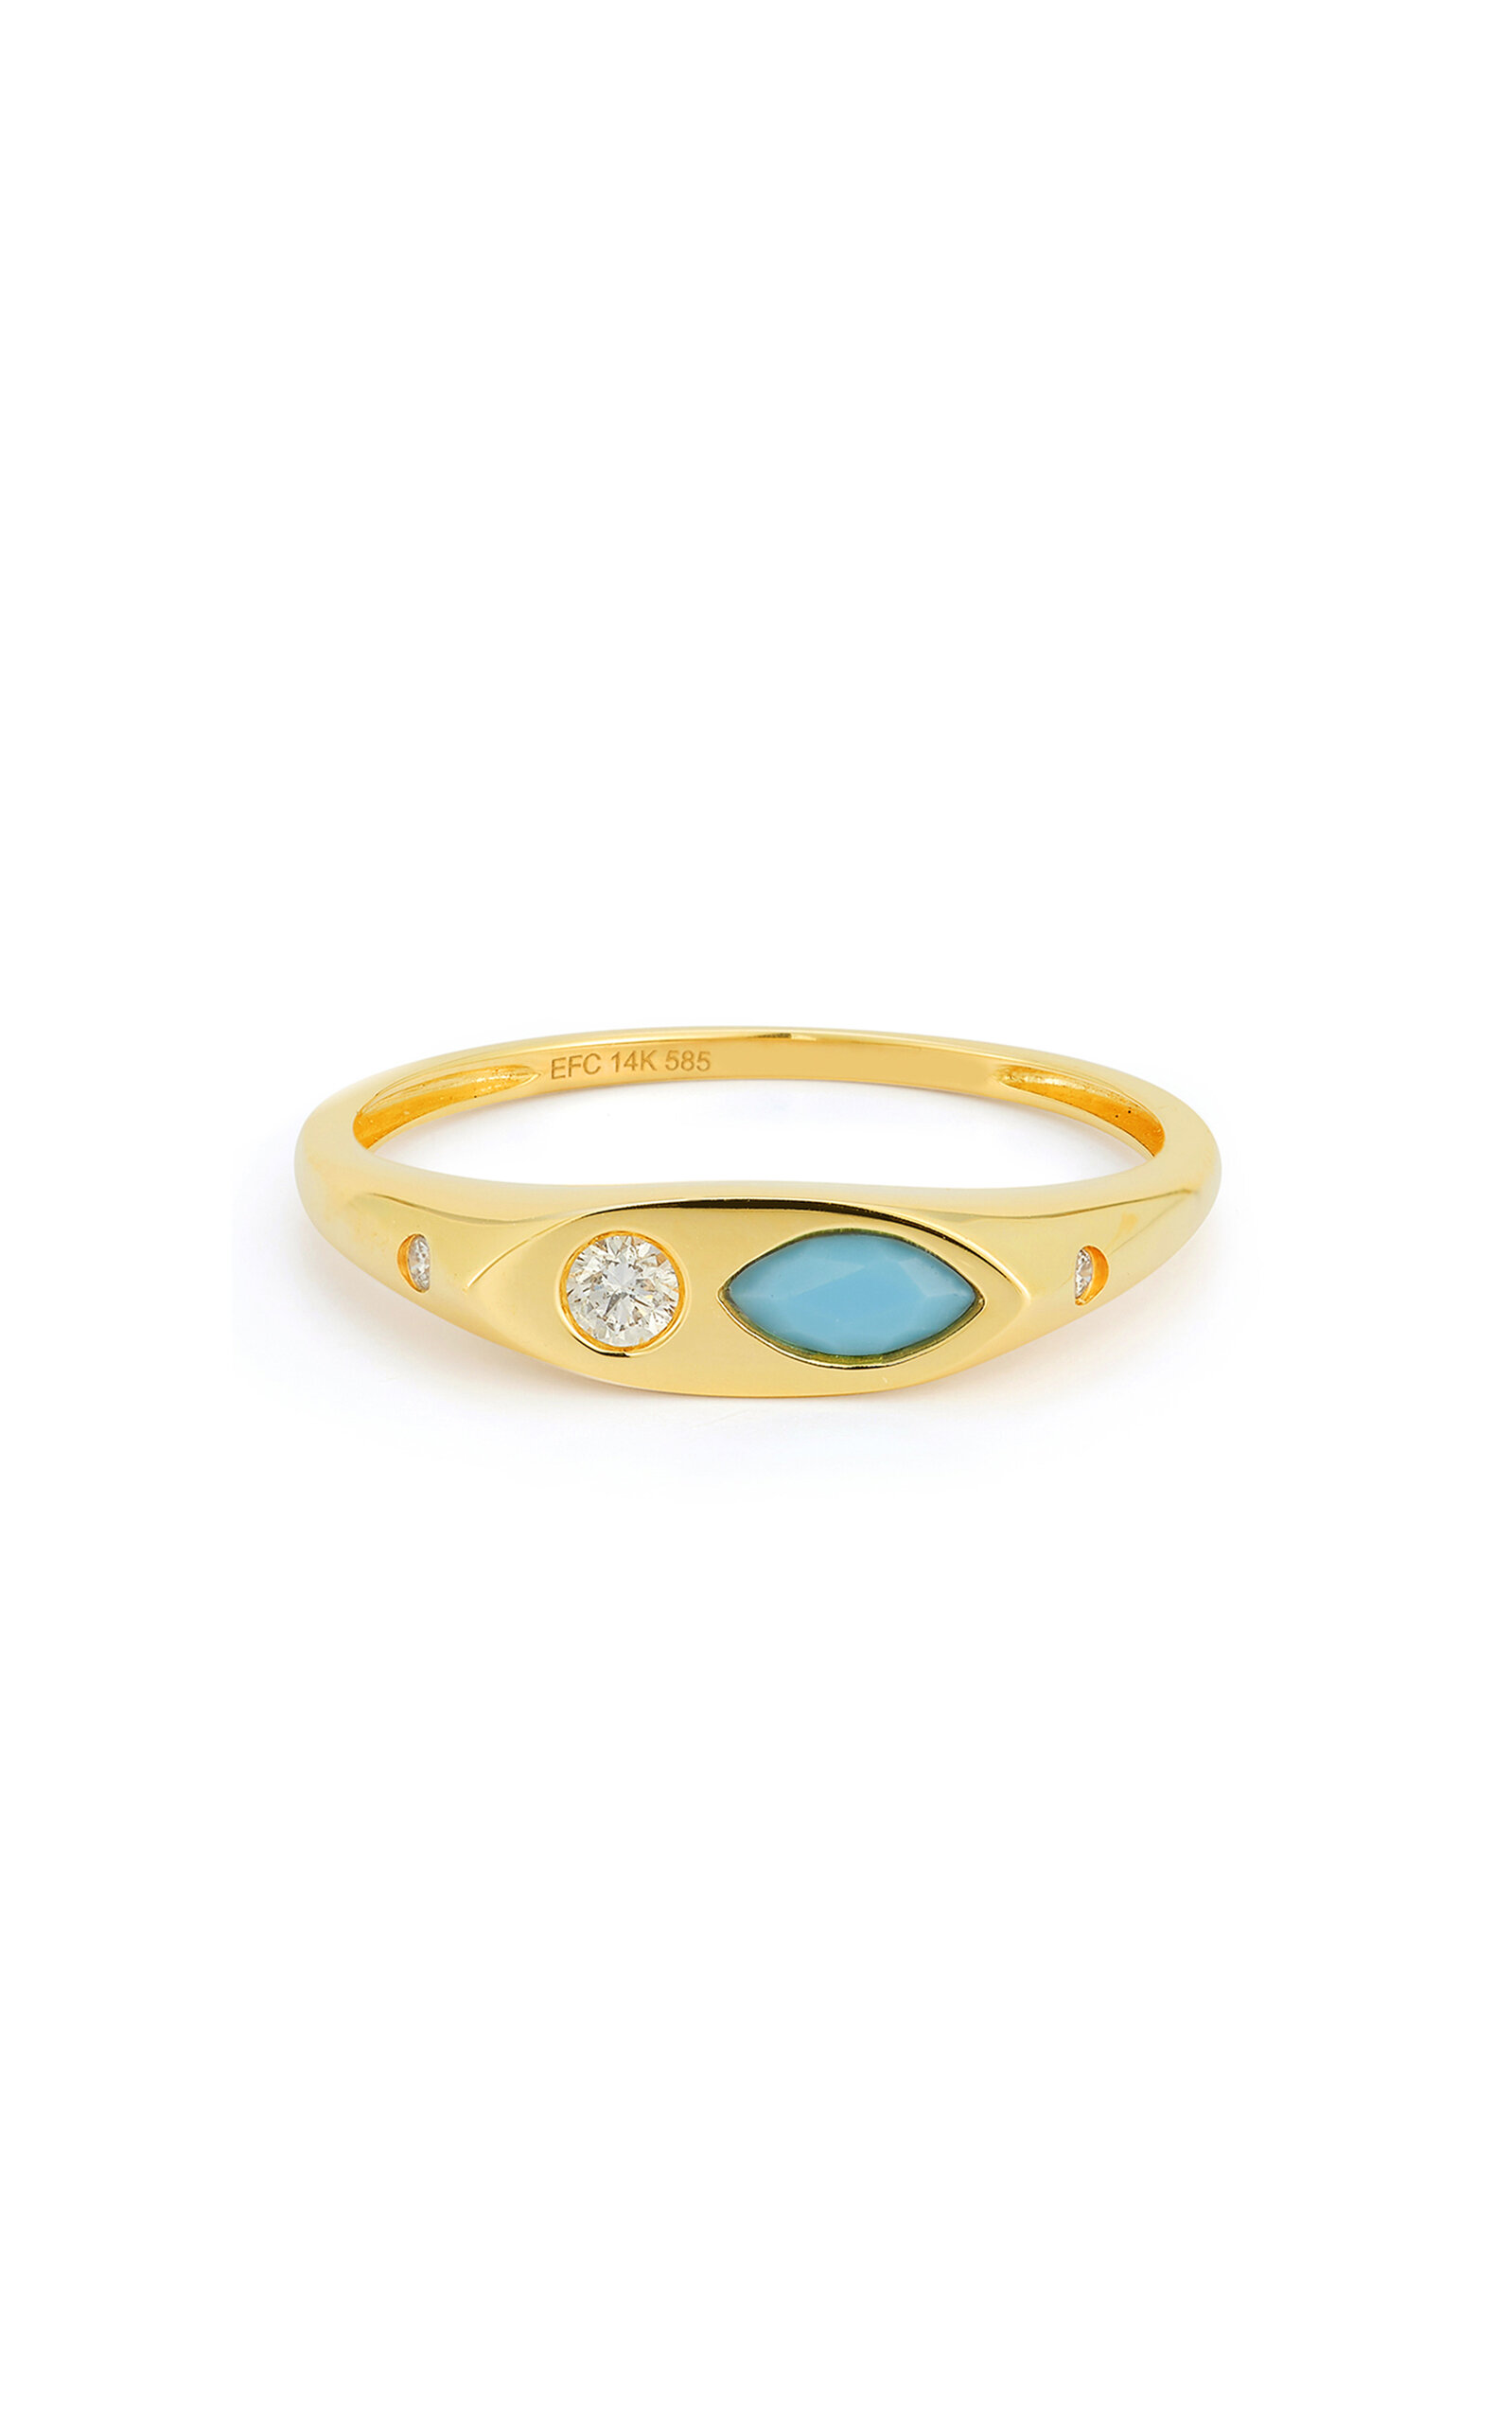 14K Gold Diamond And Turquoise Ring